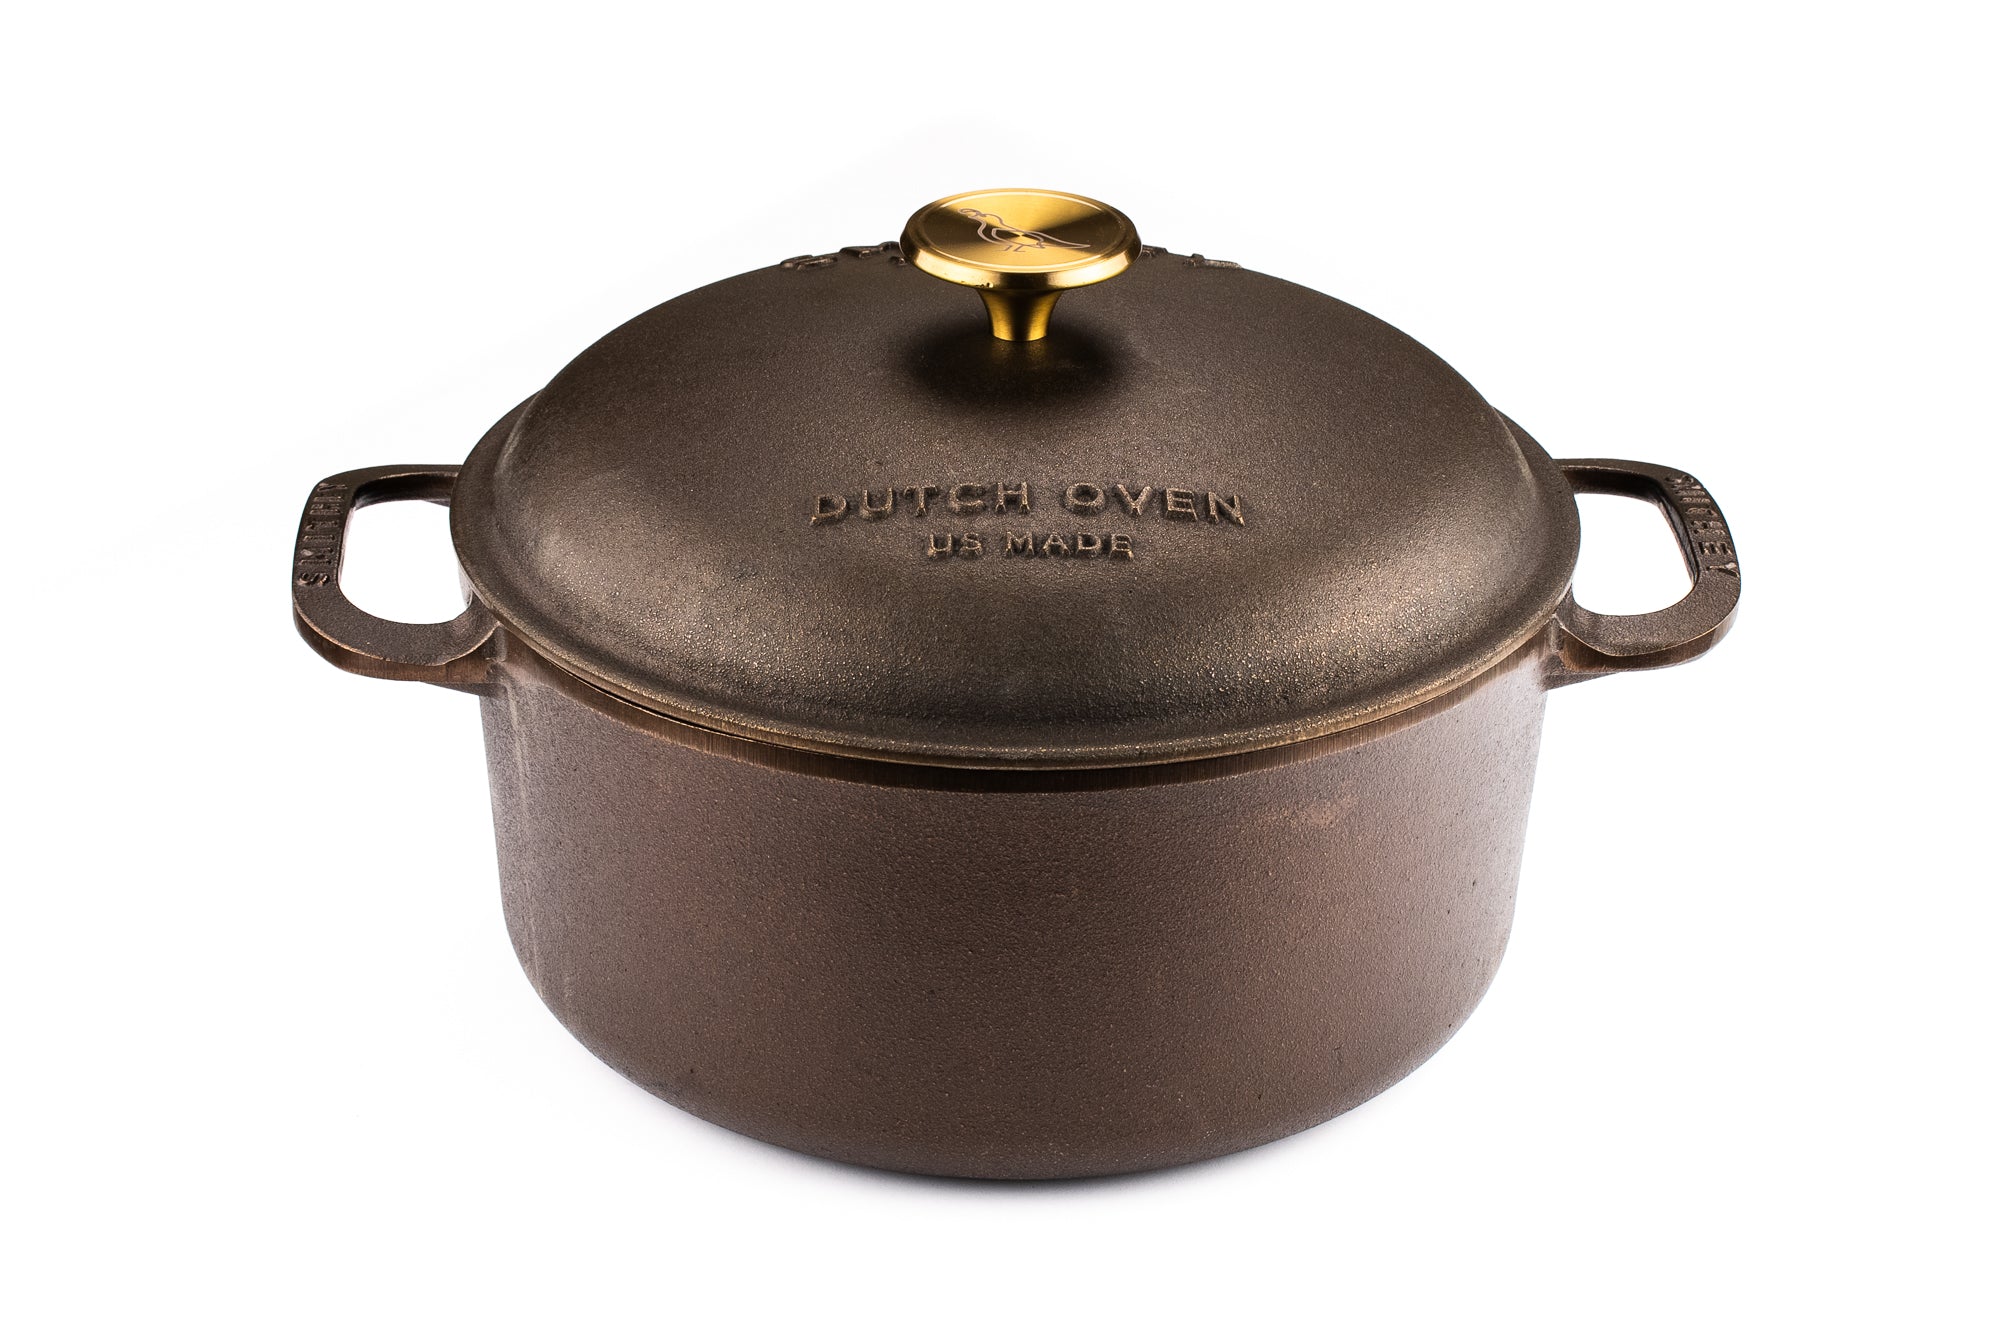 Smithey Cast Iron 3.5 Quart Dutch Oven– Whisk'd - Your Kitchen Store